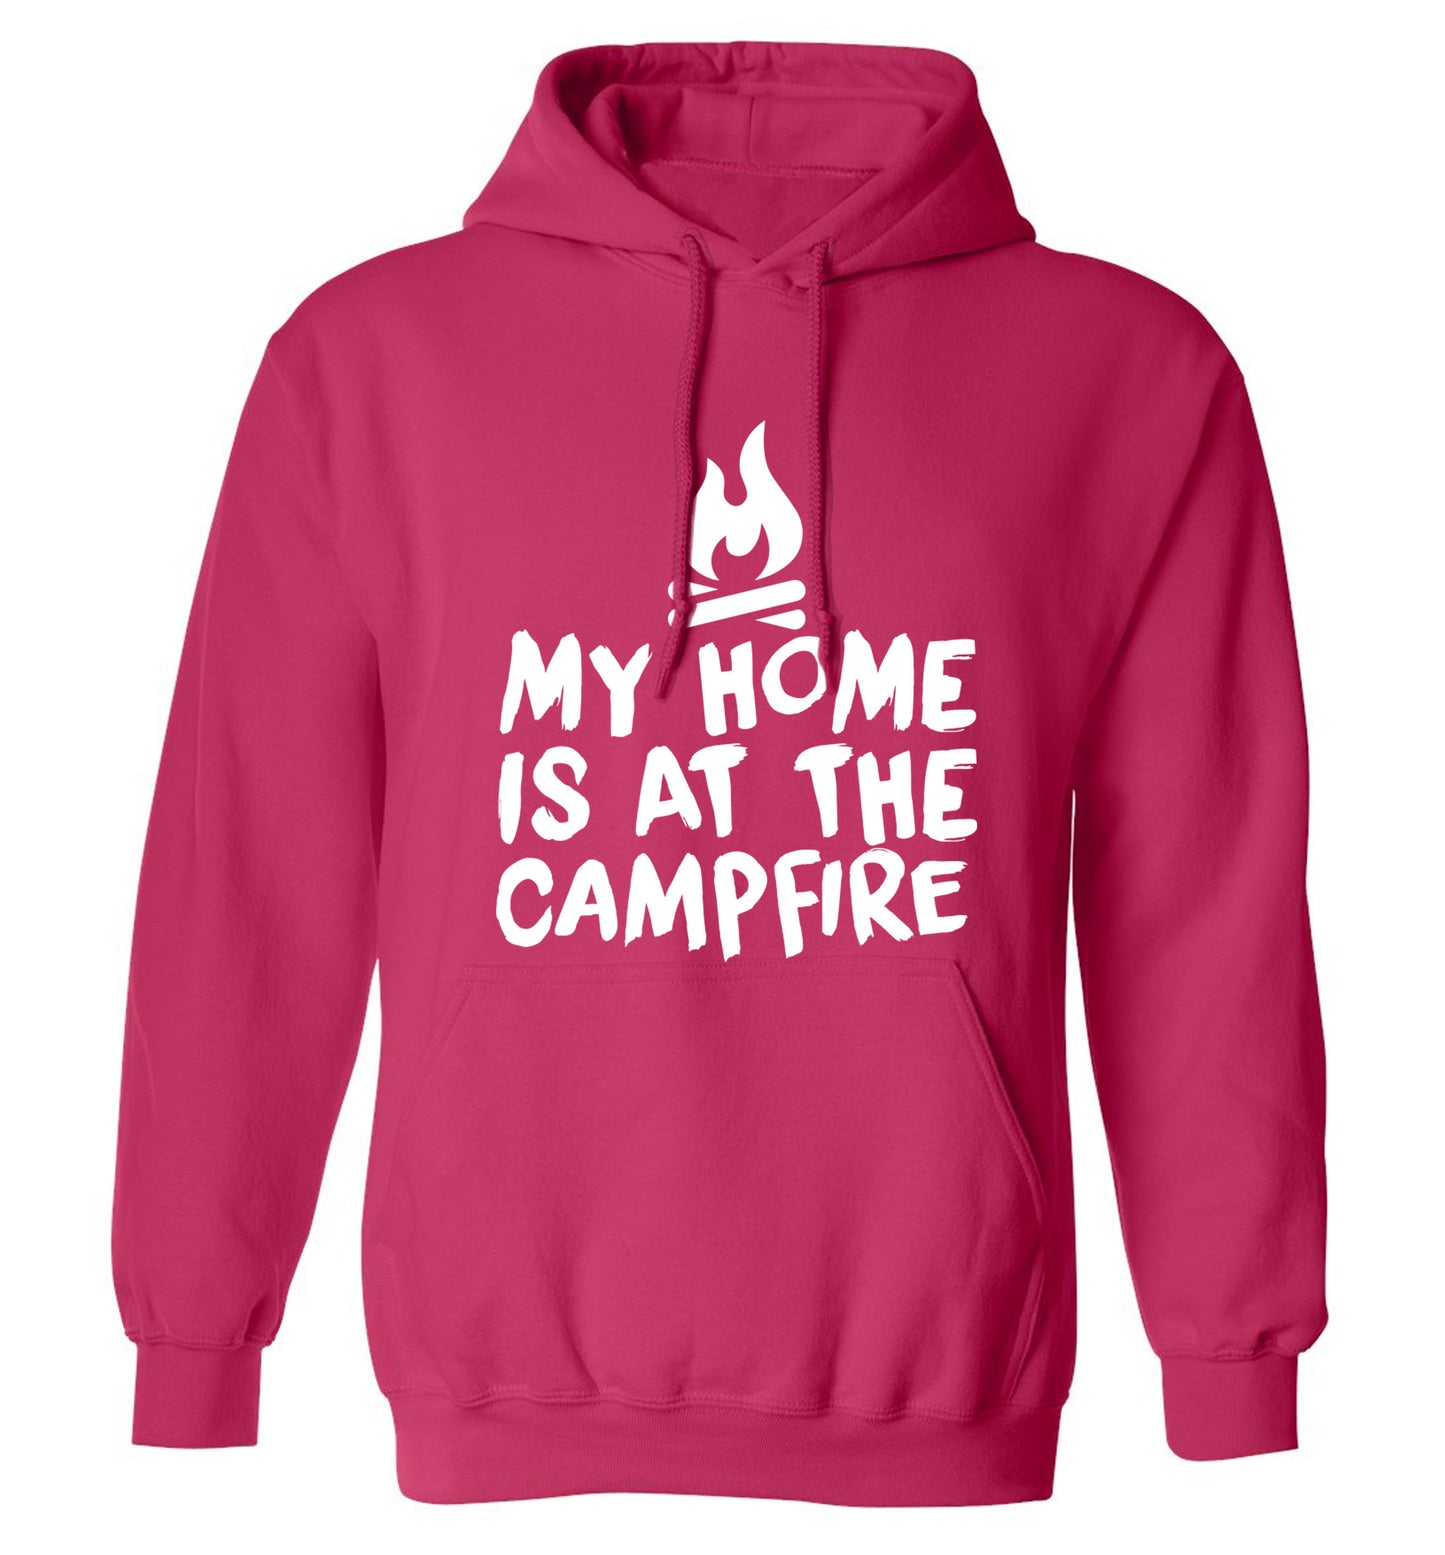 My home is at the campfire adults unisex pink hoodie 2XL